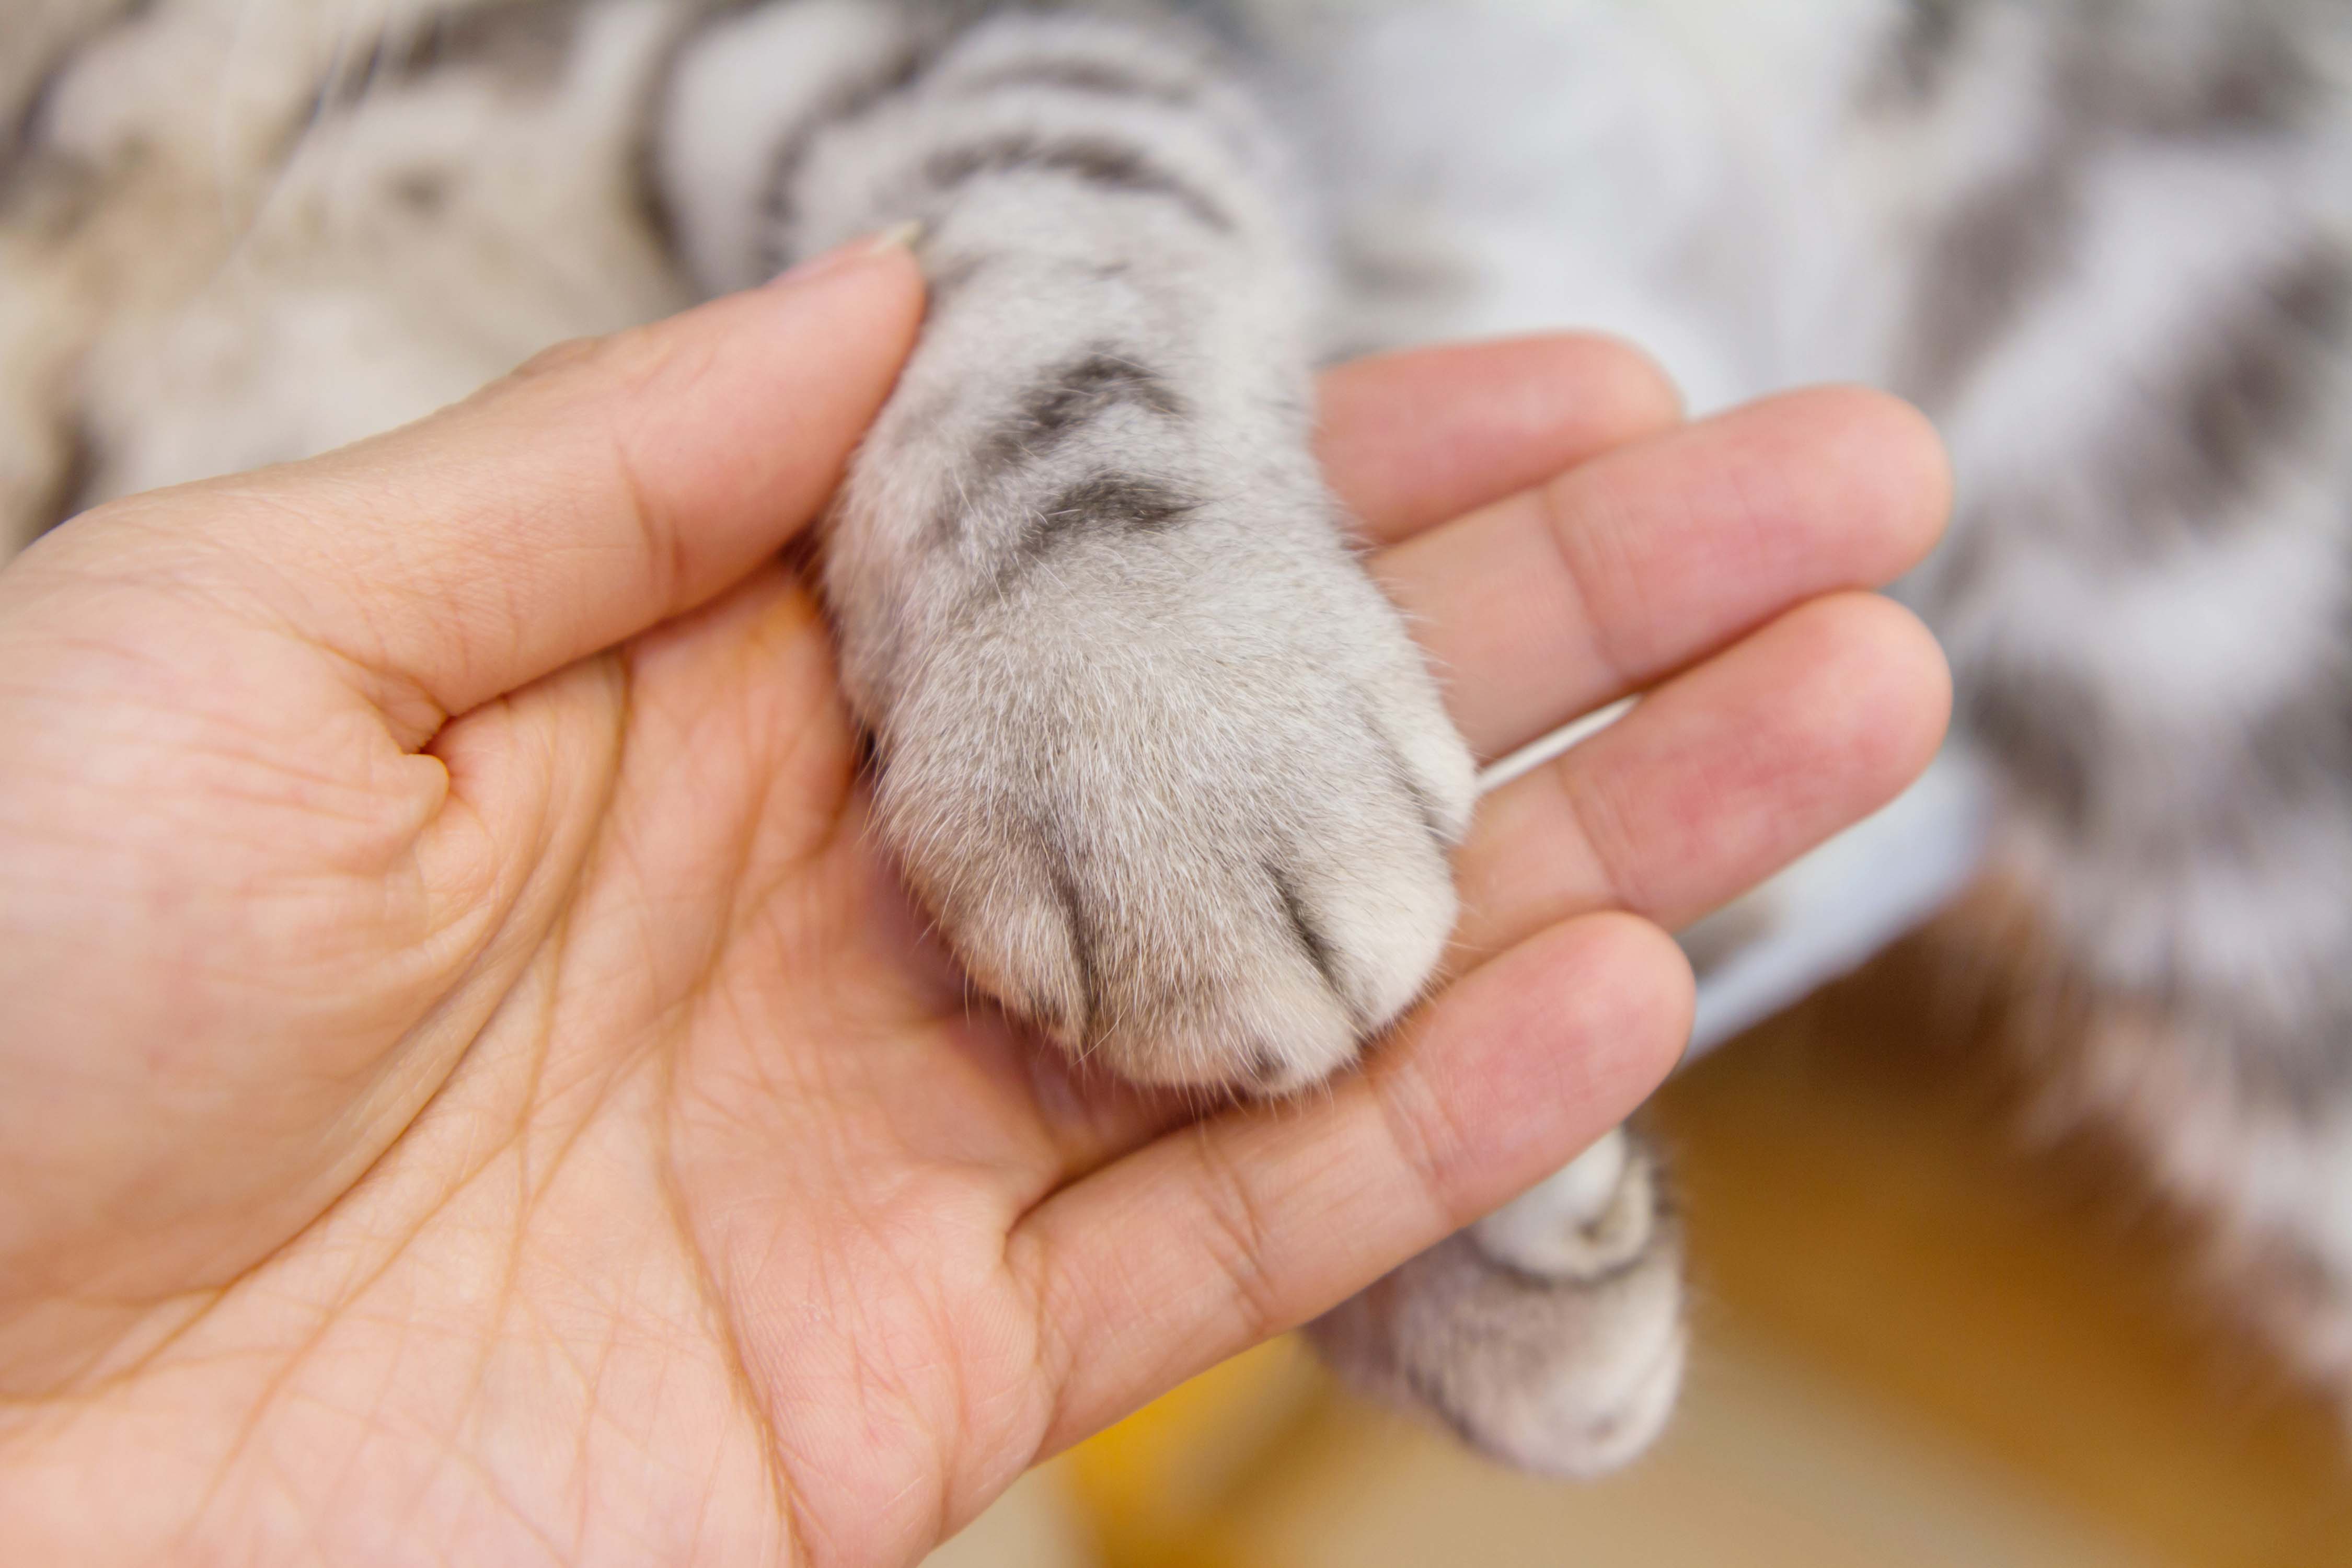 Woman's hand holding cat paw